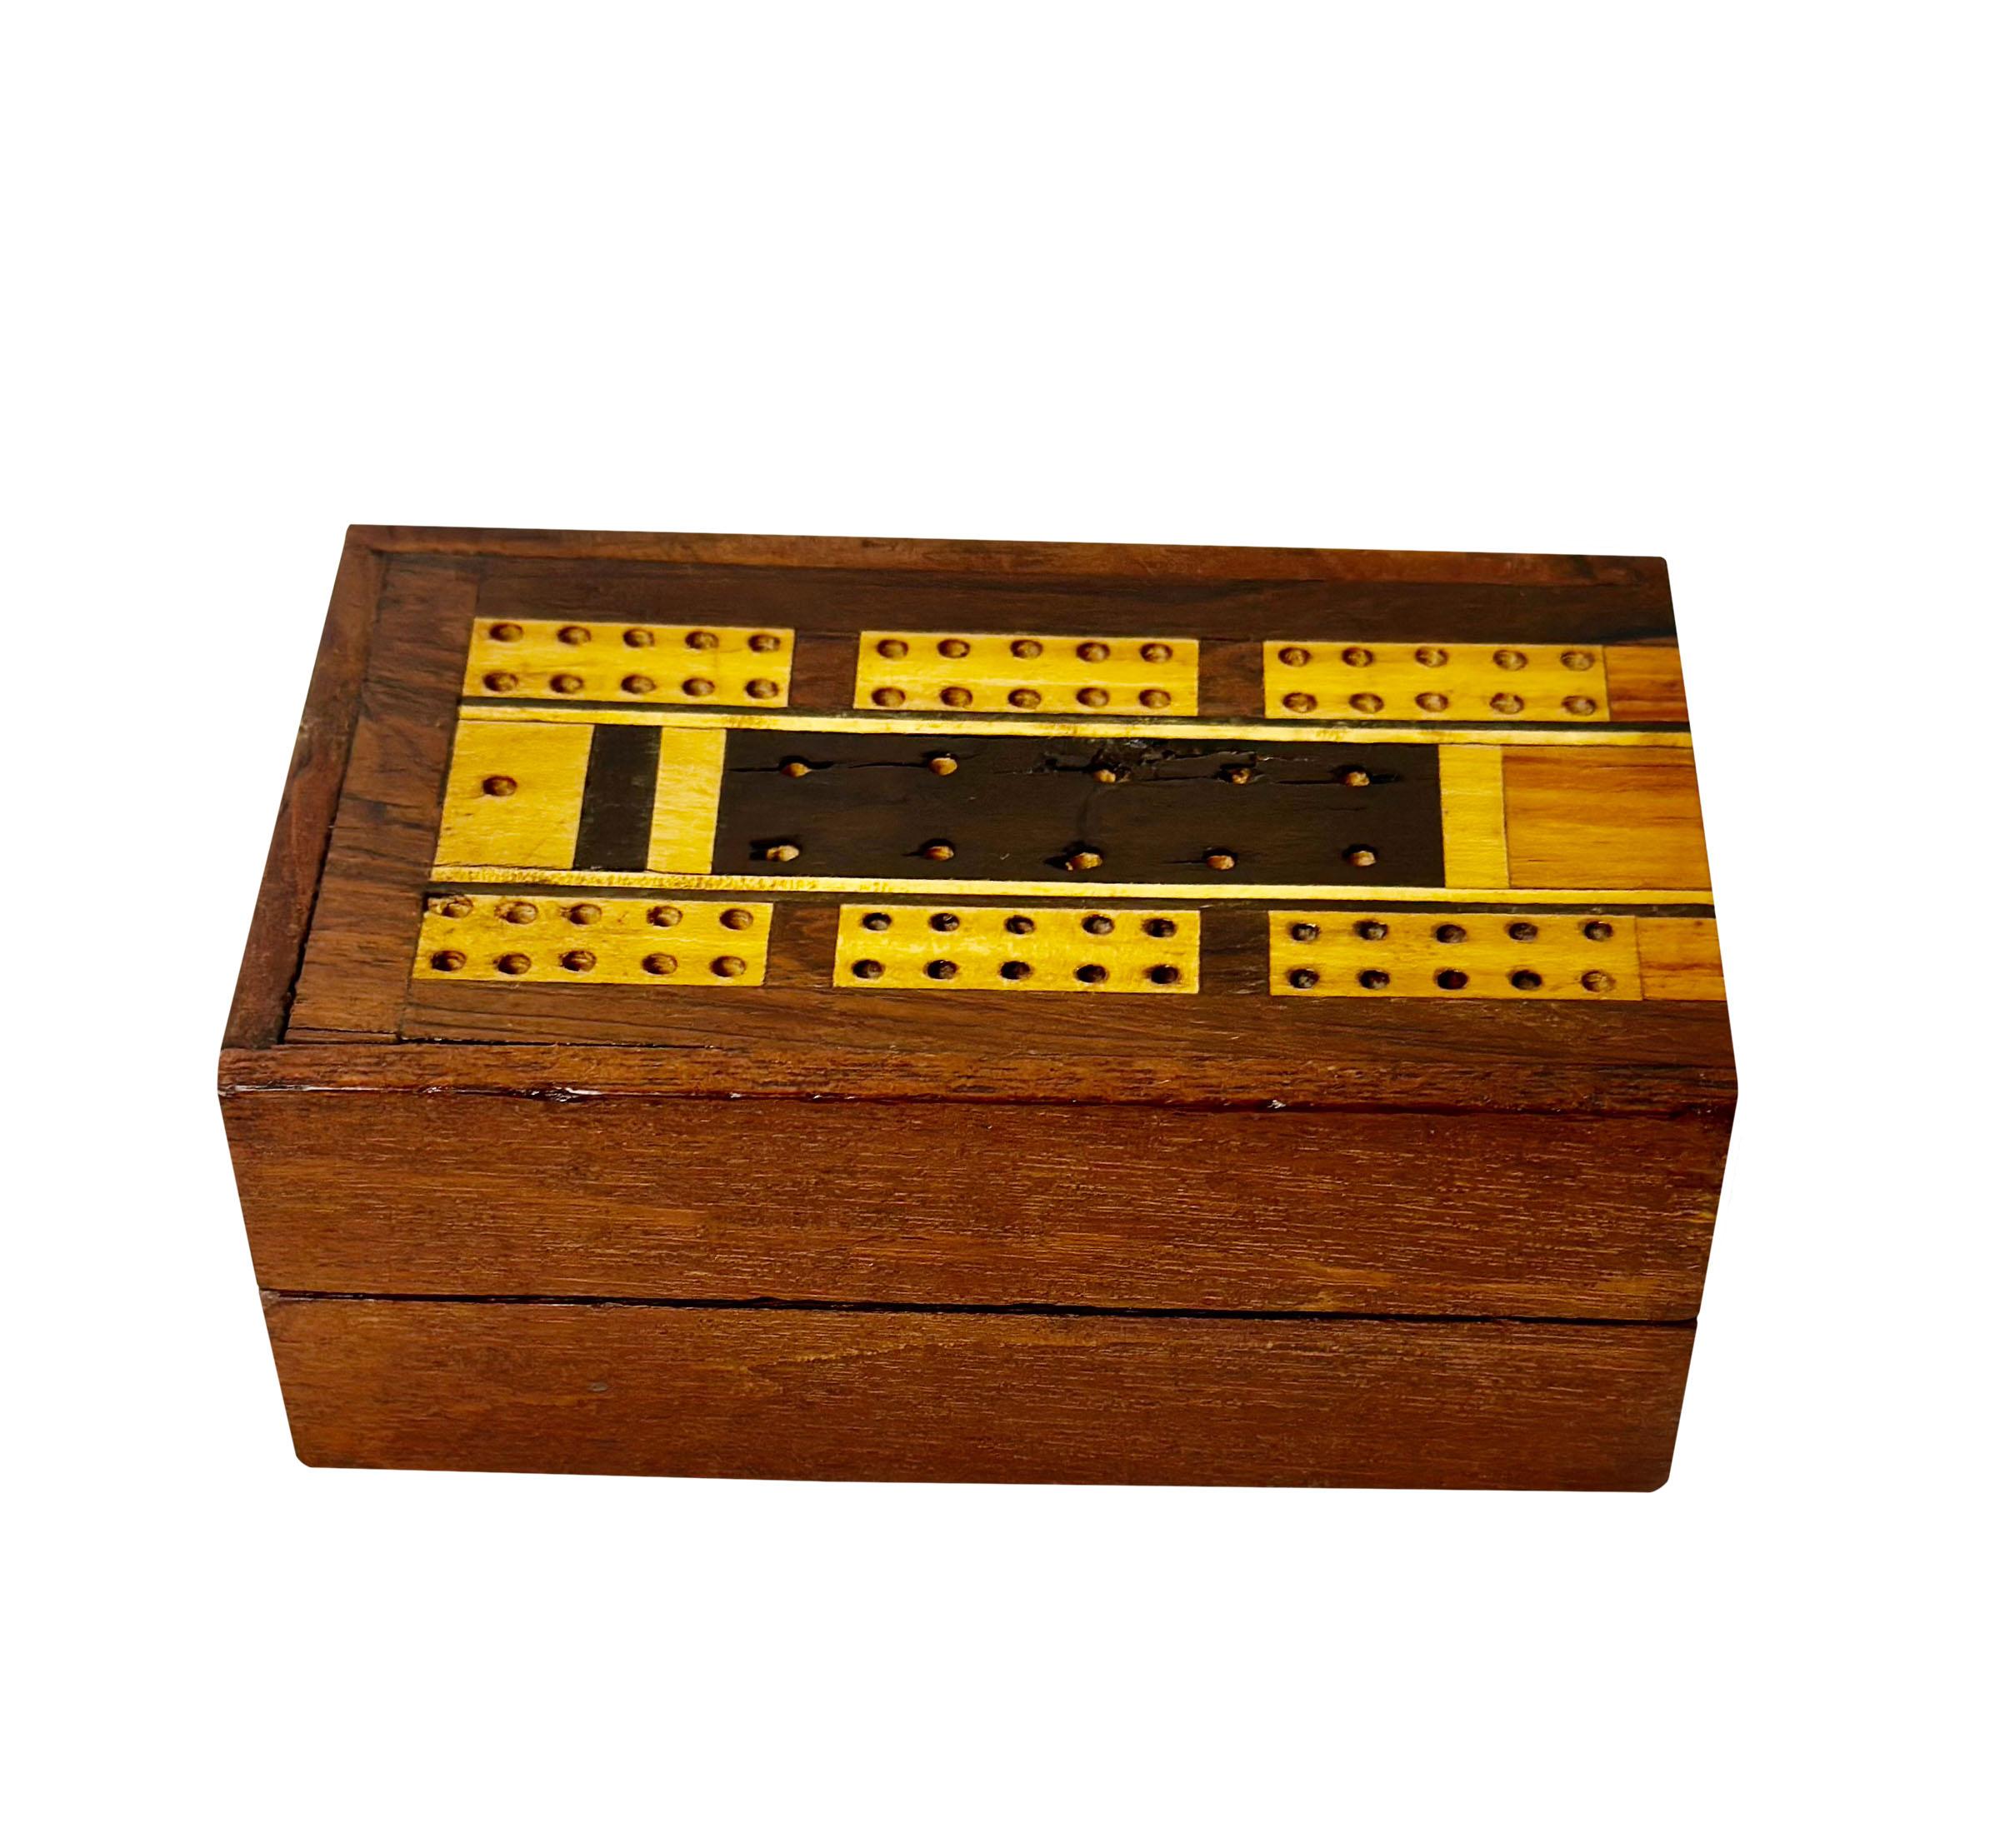 This is English late 19th century or could be a little earlier and in very nice condition. The box is beautifully inlaid has several kinds of wood, including Rosewood Mahogany and Pearwood. Includes two decks of playing cards and also has little